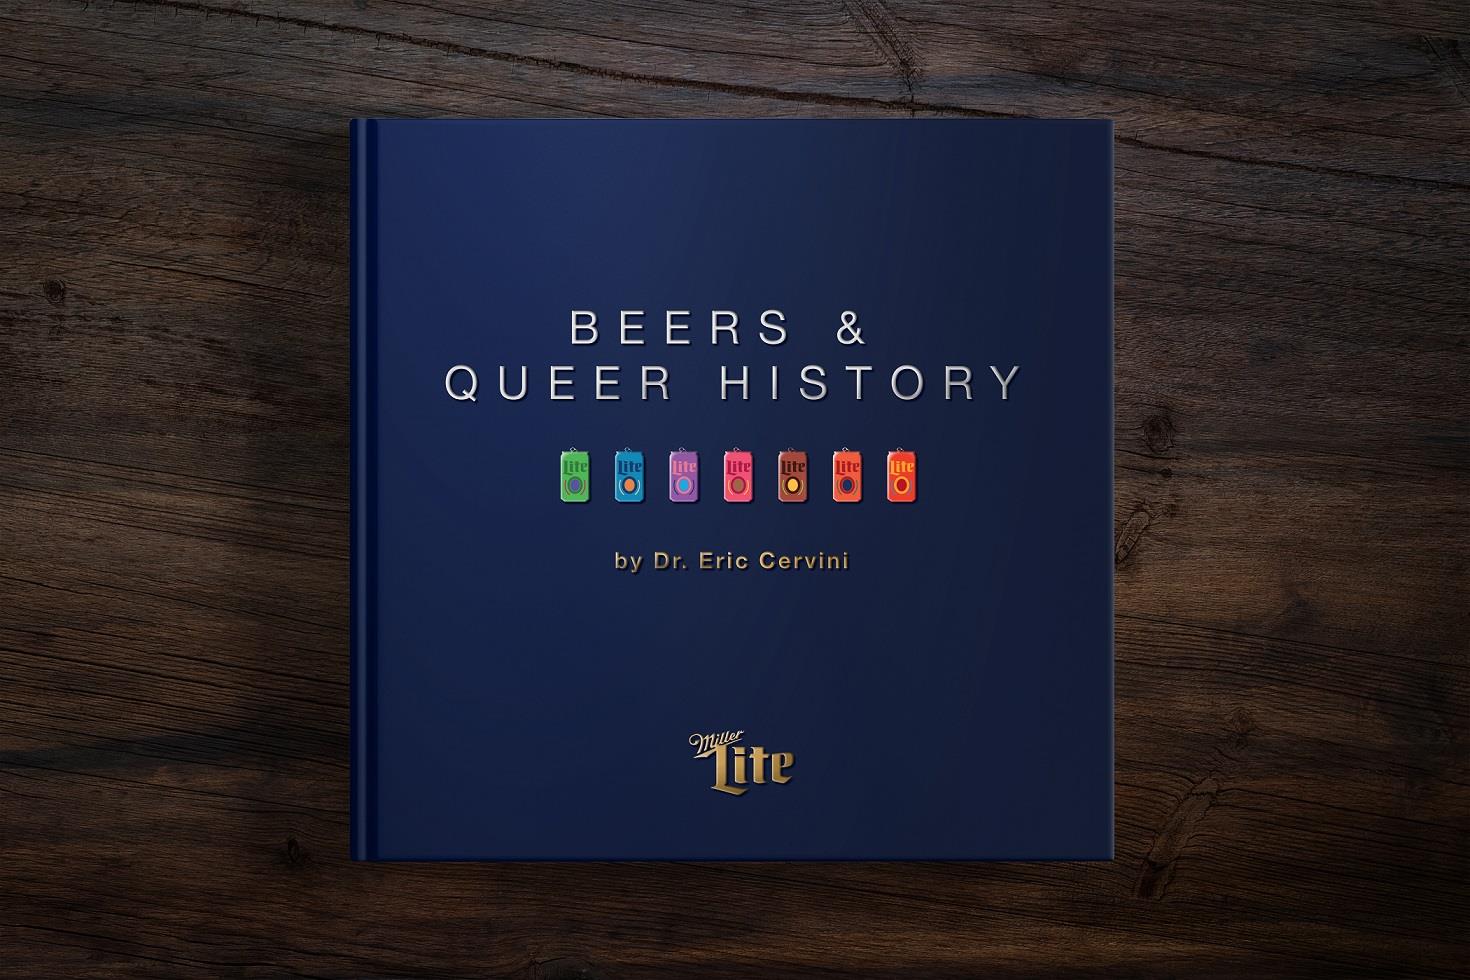 Miller Lite Celebrates the Legacy of LGBTQ+ Bars With 'Beers & Queer History' GuidebookMiller Lite Celebrates the Legacy of LGBTQ+ Bars With 'Beers & Queer History' Guidebook